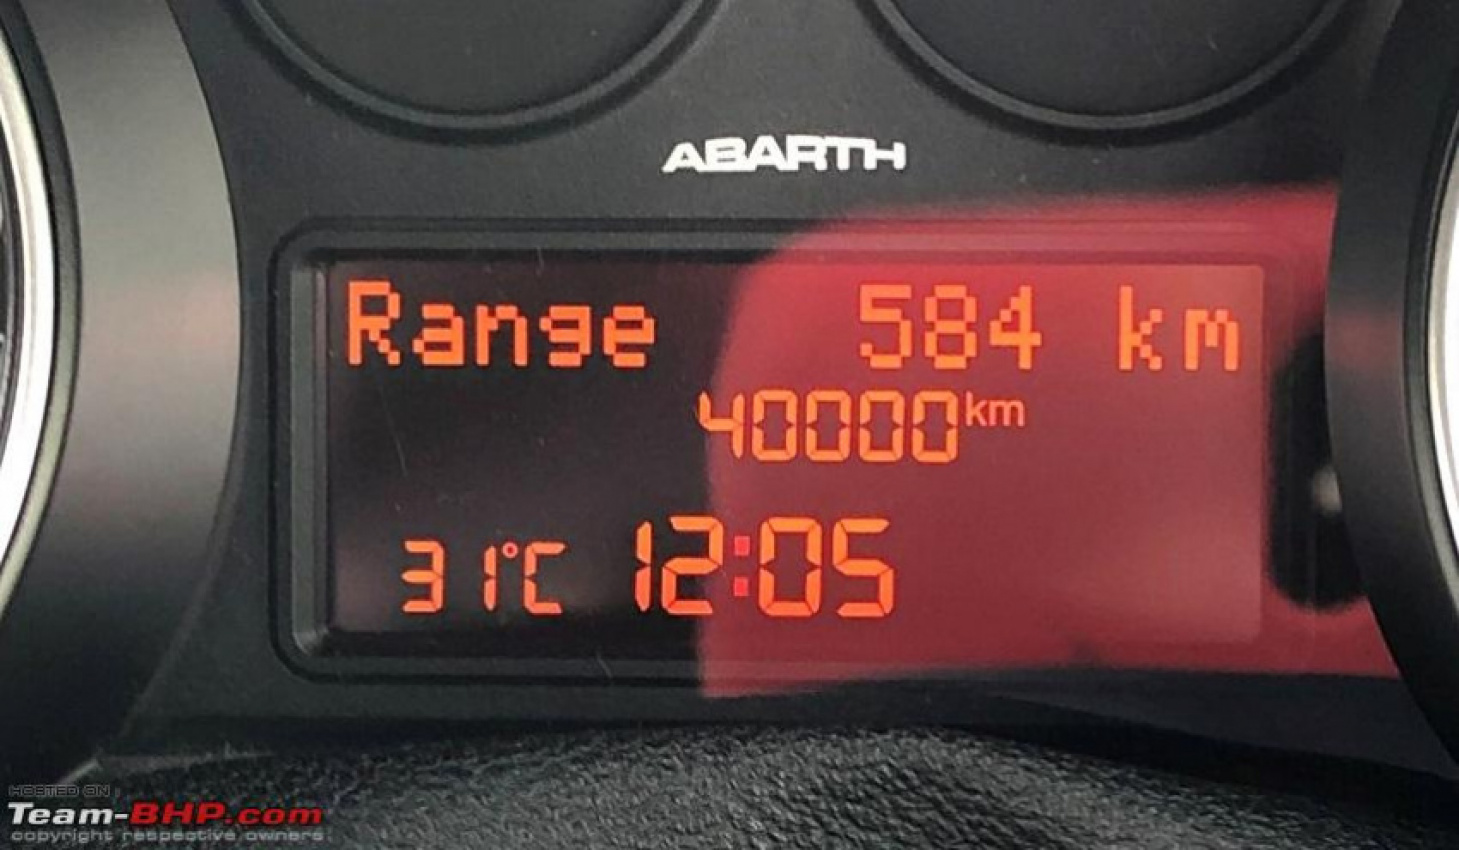 autos, cars, fiat, abarth, indian, member content, punto, my fiat abarth punto completed 40,000 km during a road trip to calicut